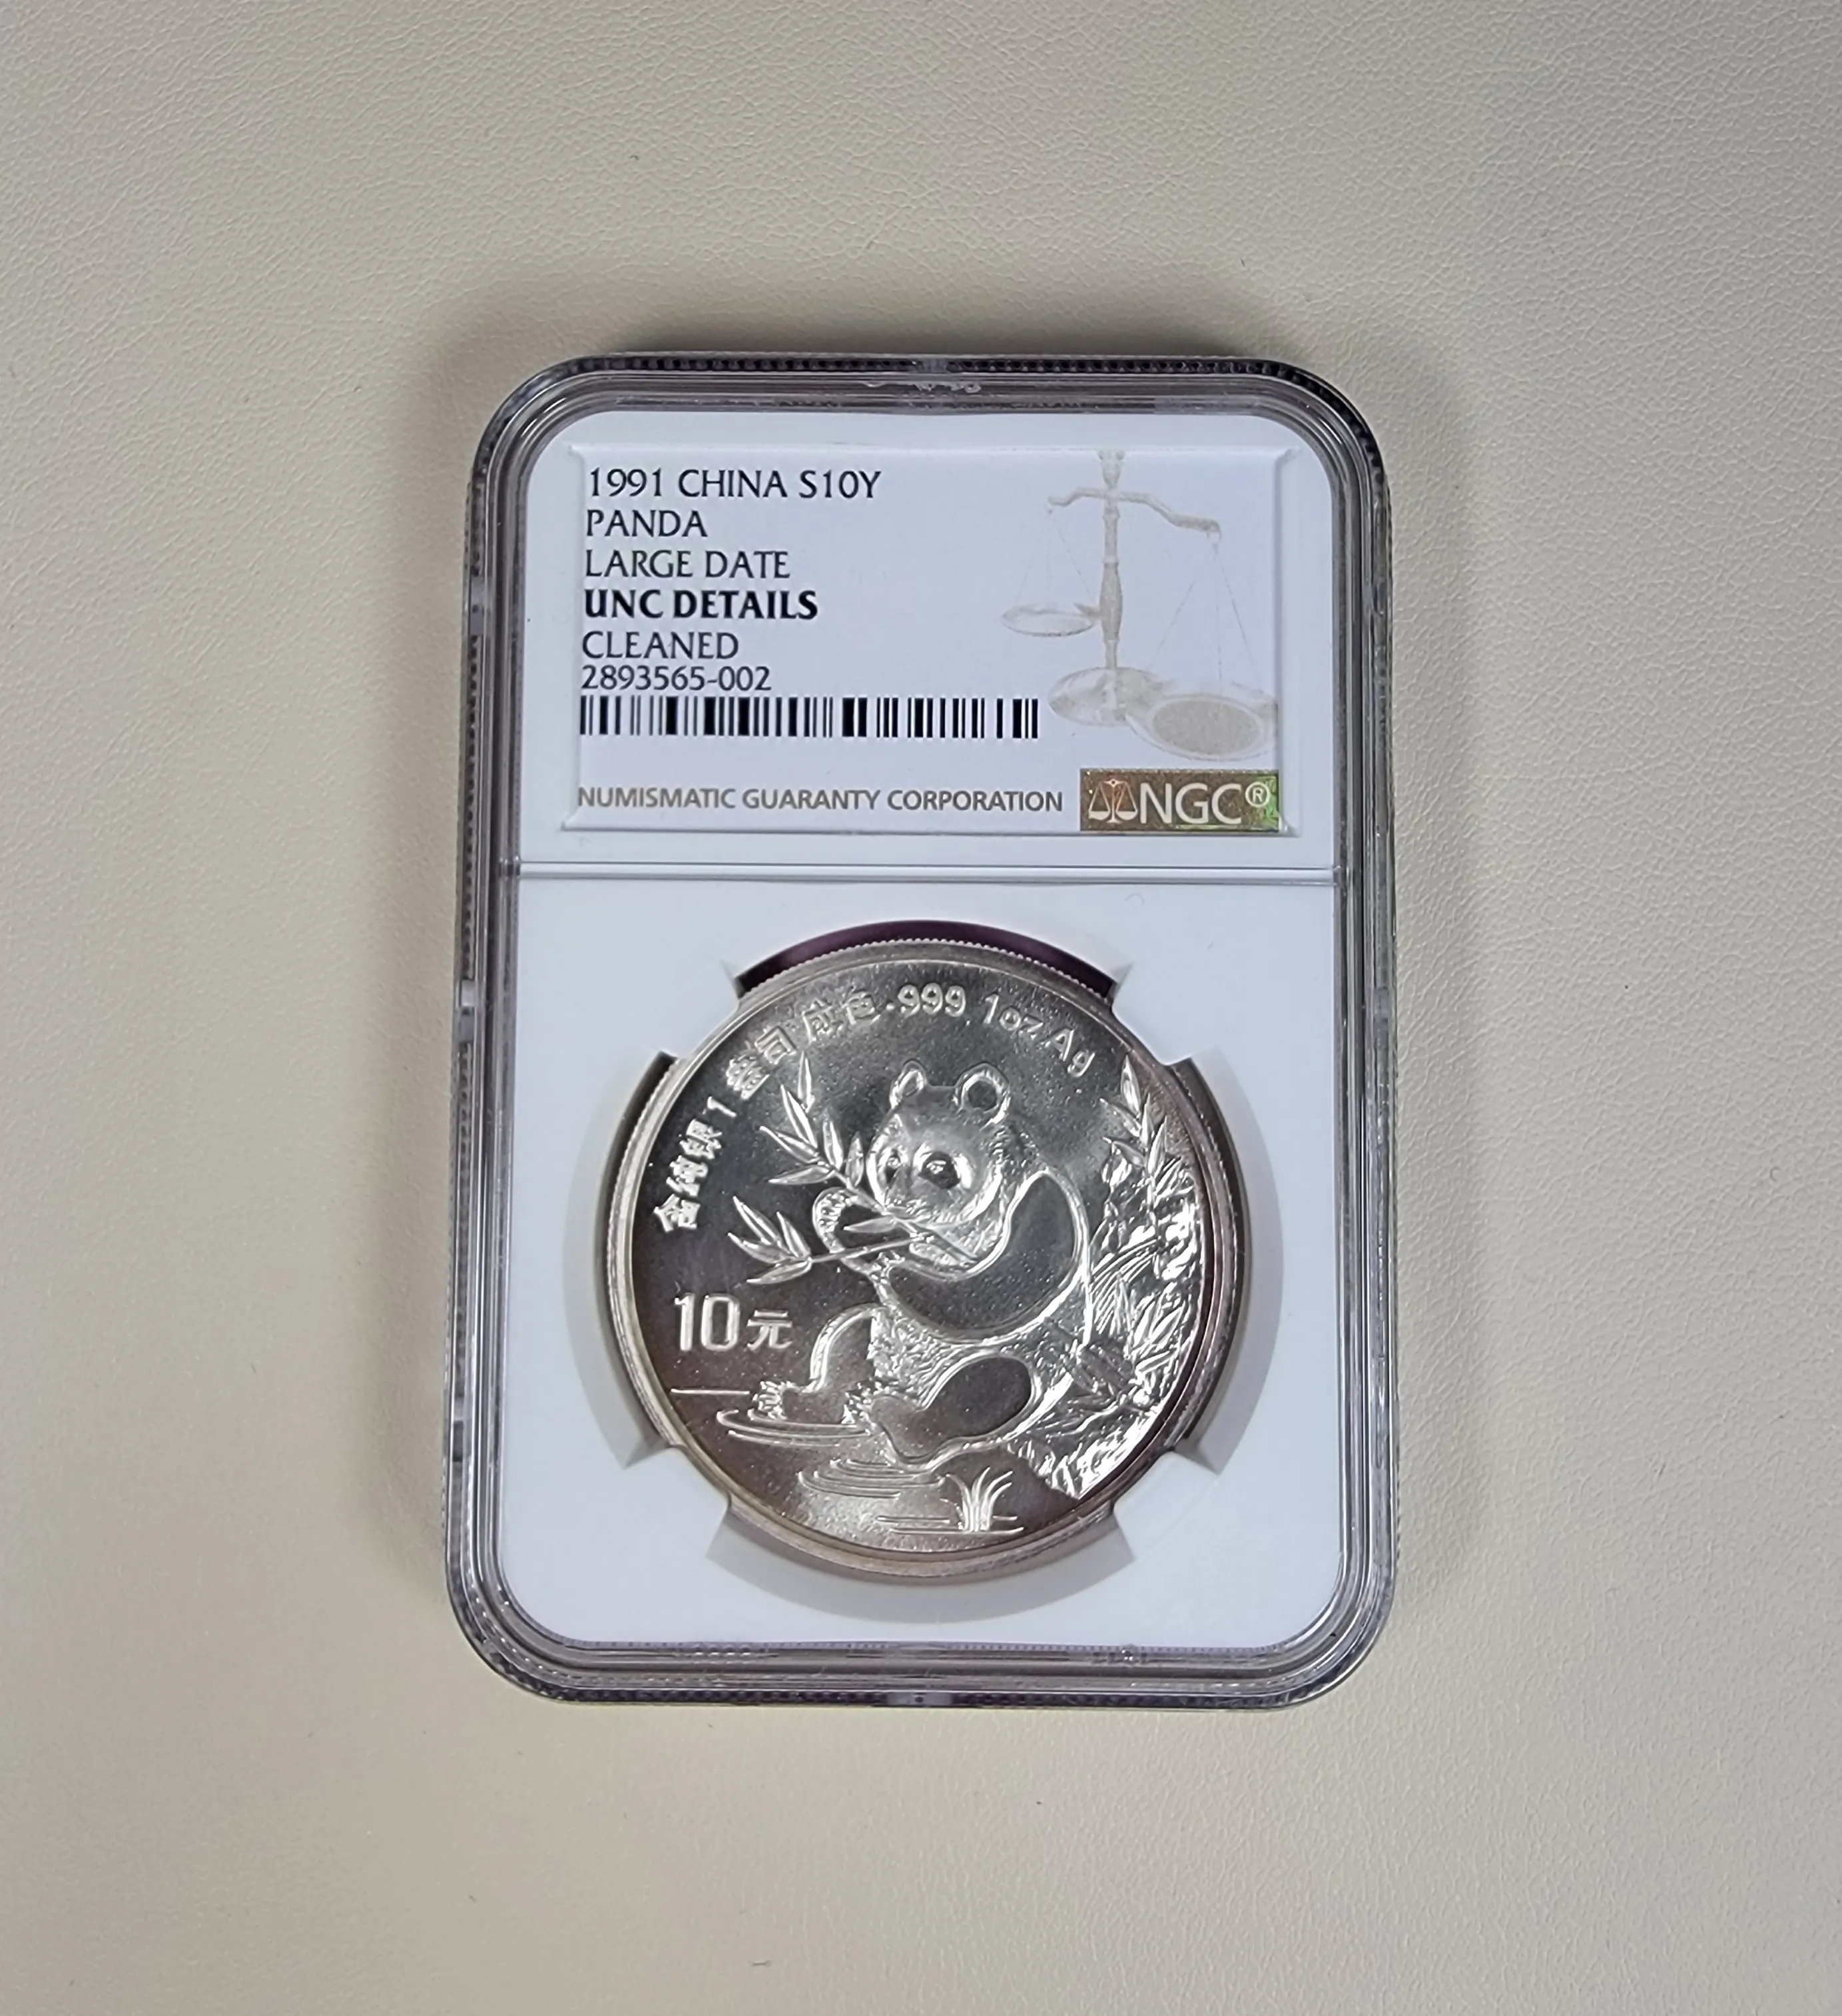 Sell your rare coins in NYC or Long Island